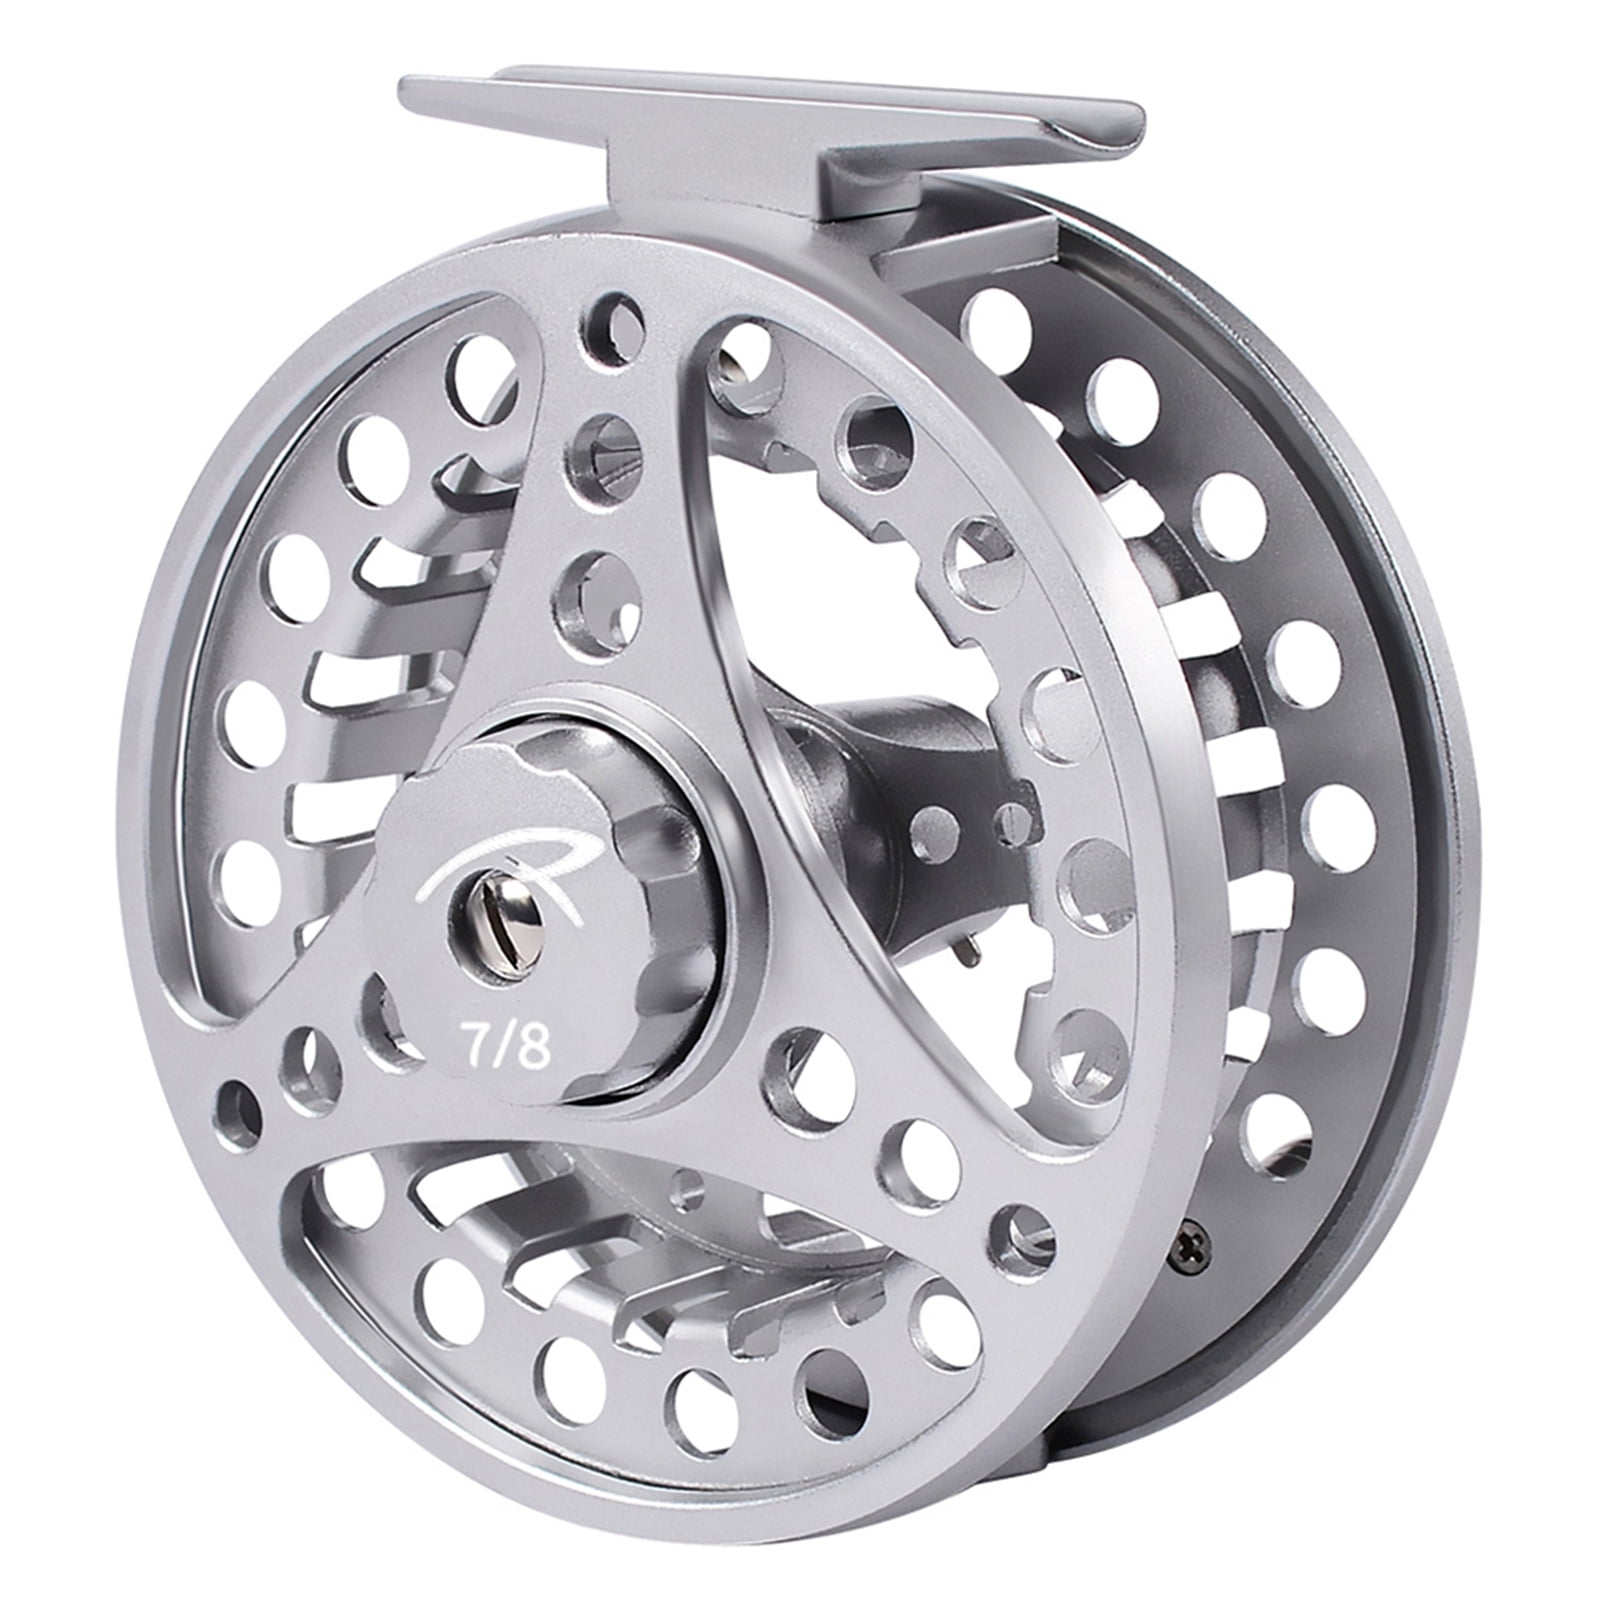 Silver 85mm 5/6 Aluminum Fly Fishing Reel Trout Fishing Left or Right Handed USA 